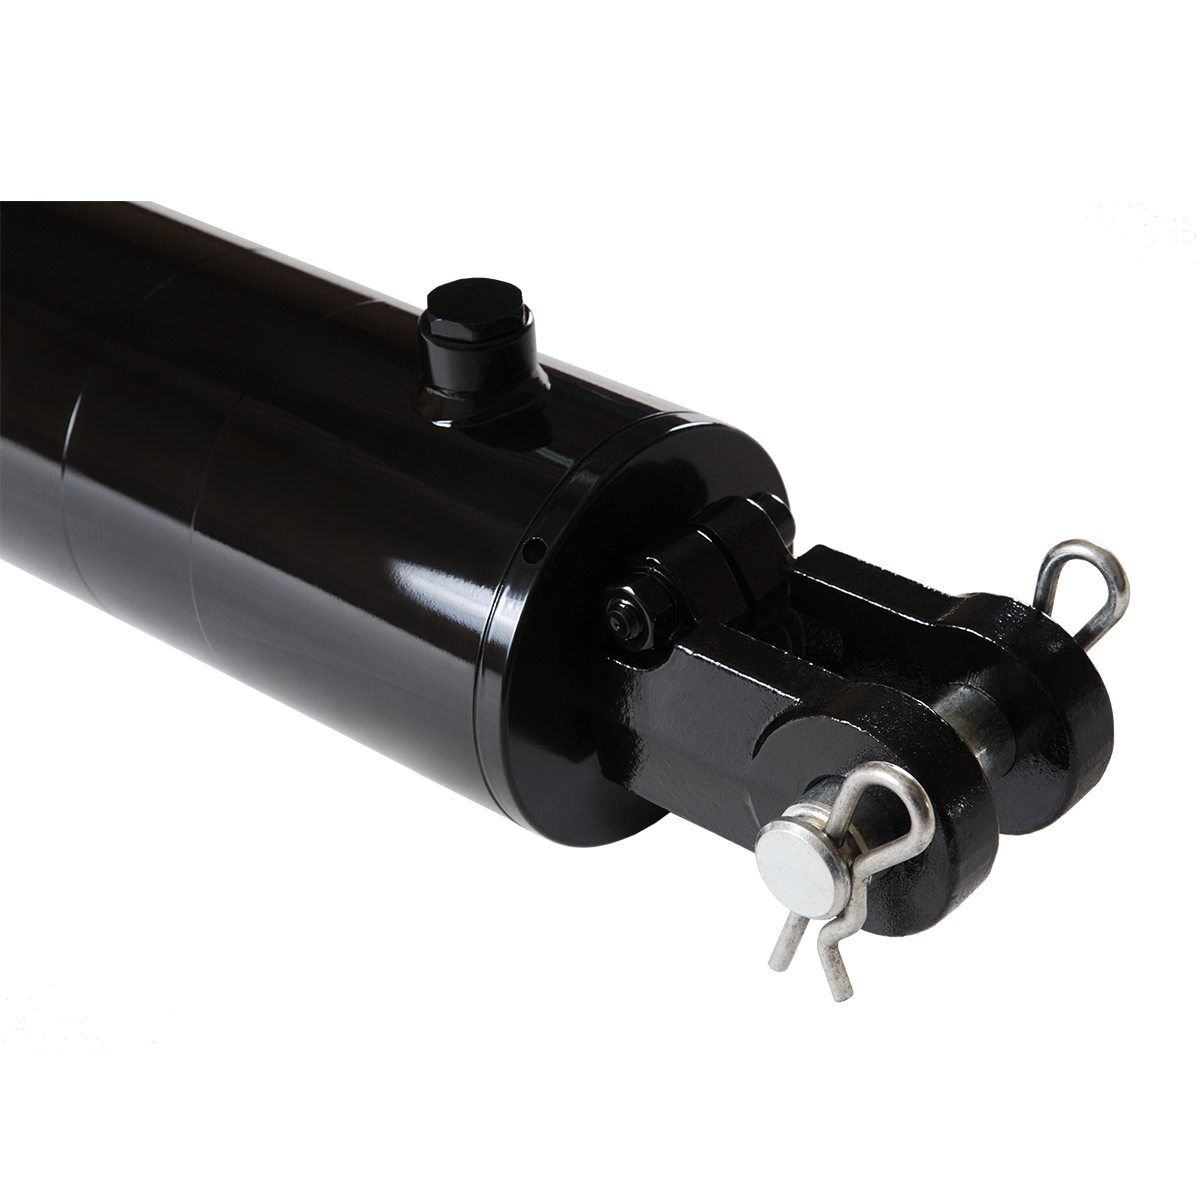 4 bore x 12 stroke hydraulic cylinder, welded clevis double acting cylinder | Magister Hydraulics